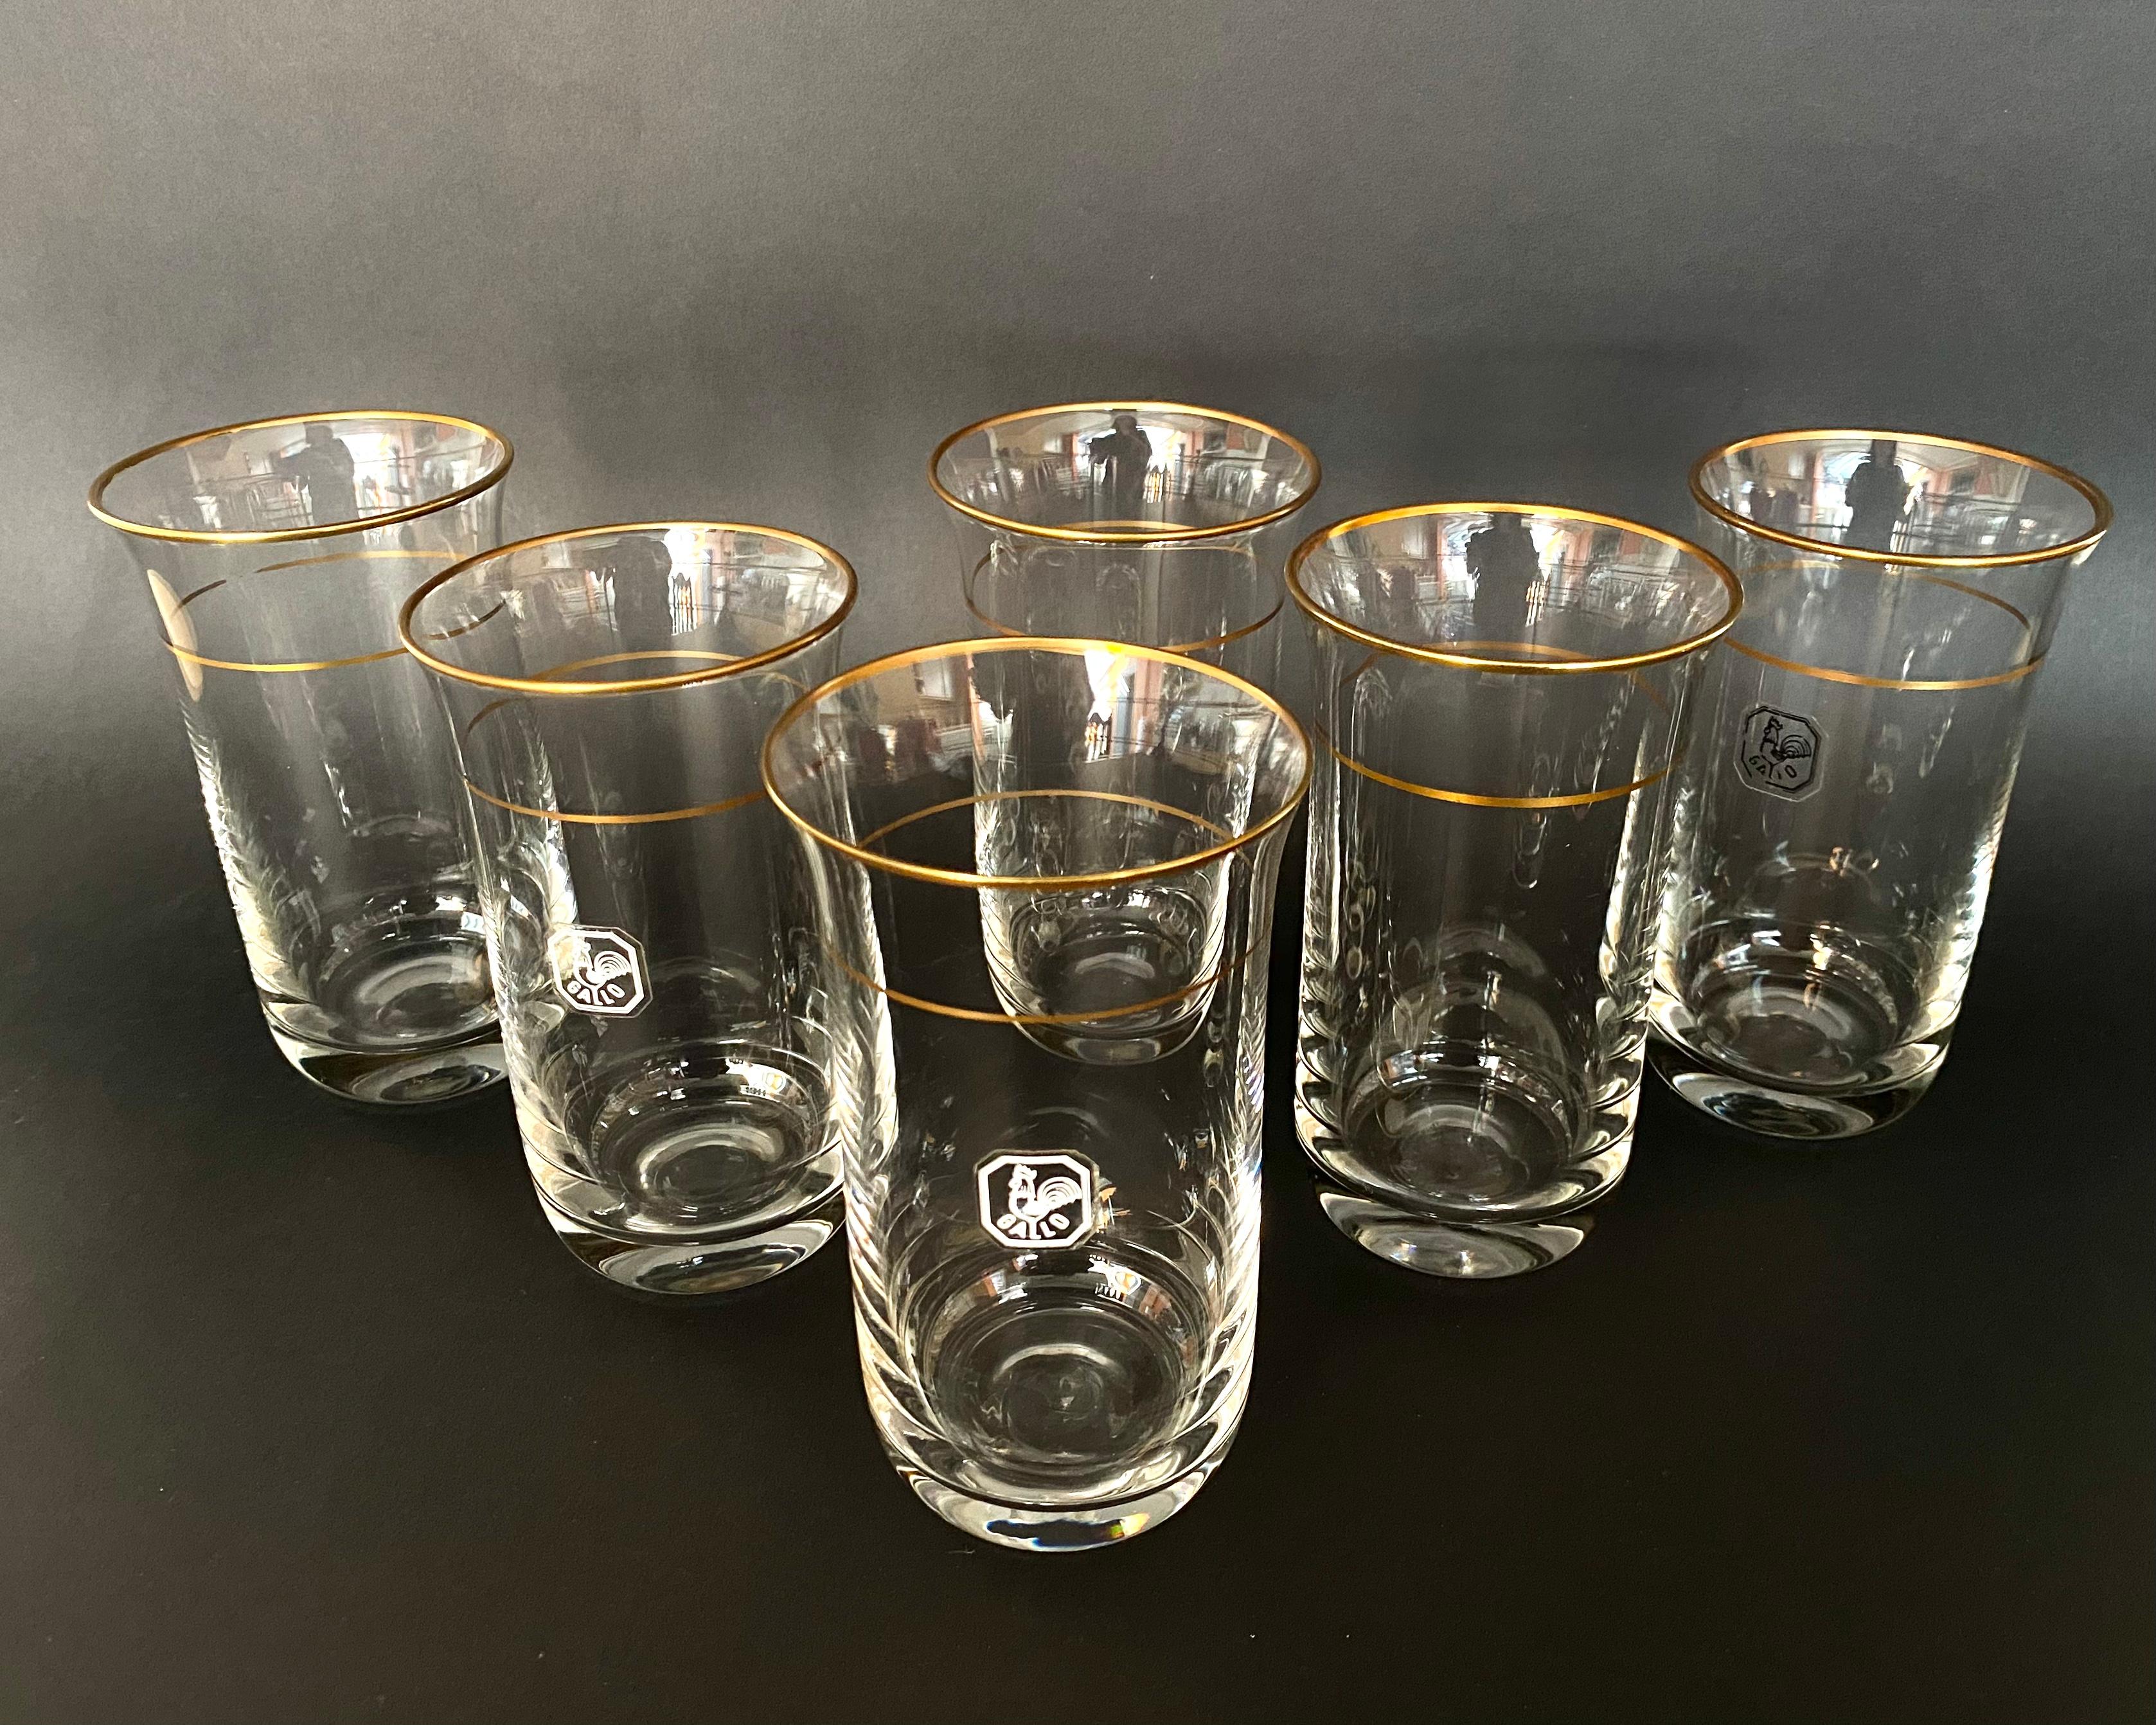 Vintage Crystal Water Glasses GALLO, Germany, 1970s

Vintage Crystal Water Glasses with gilt rim, Set 6 pieces, produced in Germany by GALLO manufacturer, circa 1970s. 

Gallo Glasses Are Famous For Their Unsurpassed Beauty And Royal Splendor.